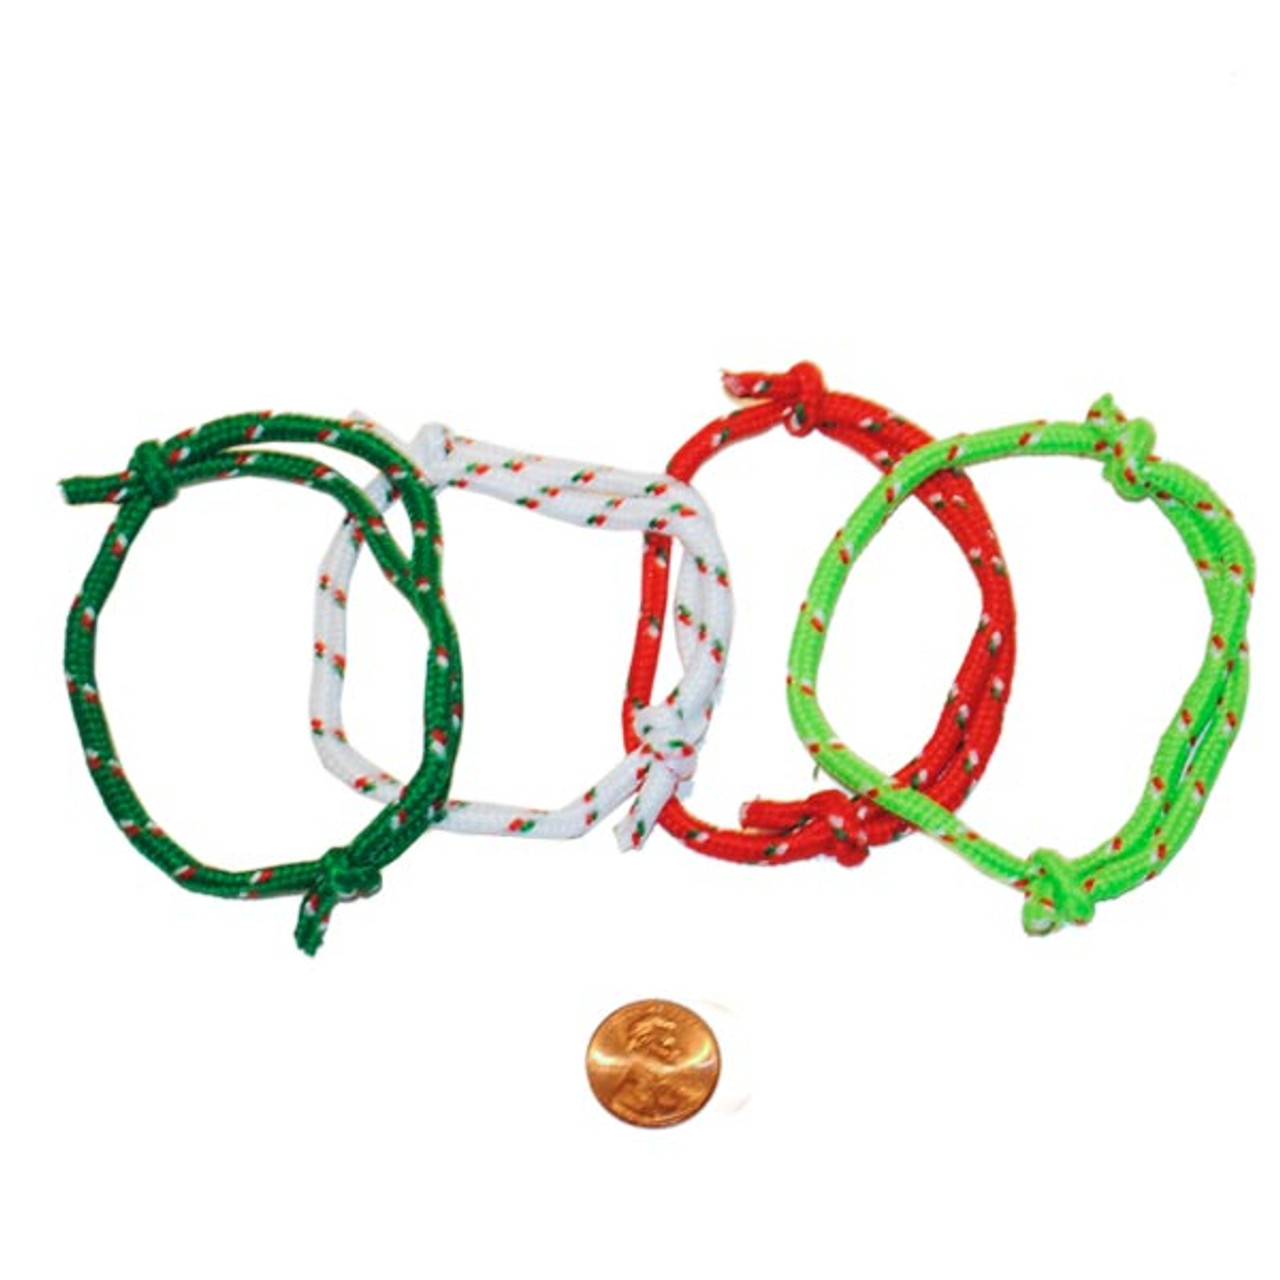 Christmas Colored Rope Bracelets - Inexpensive Prize for Kids!